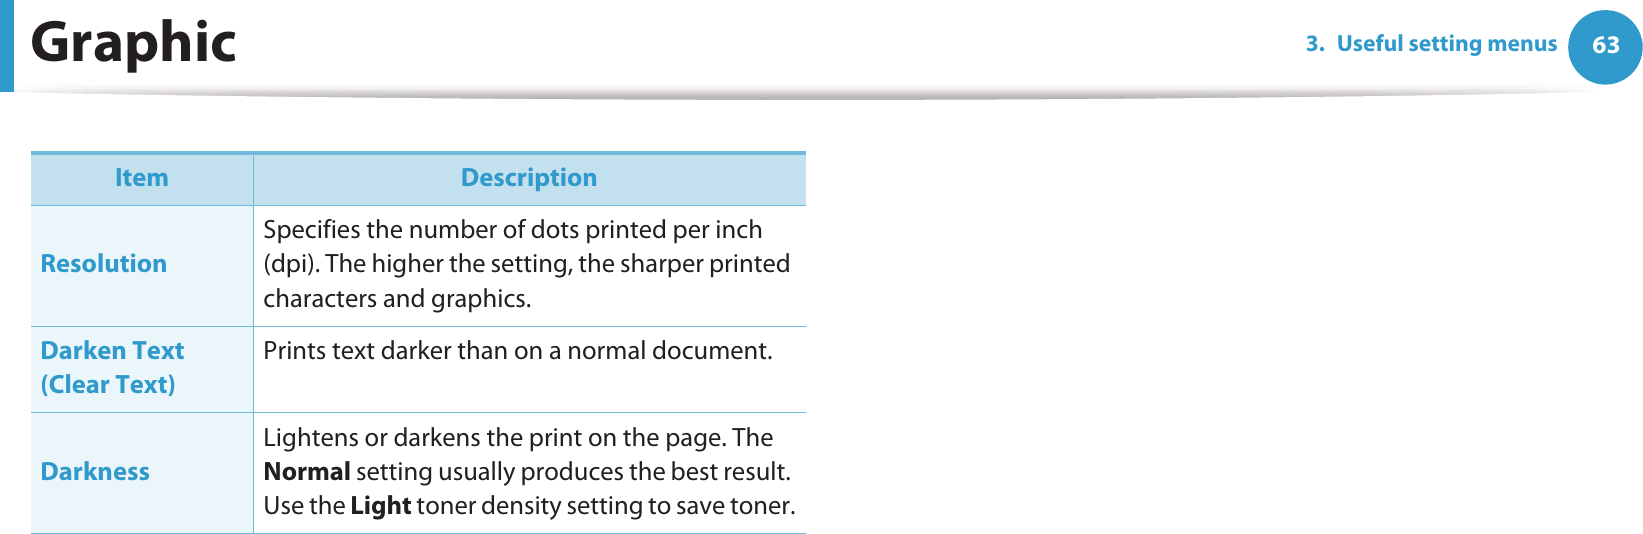 633. Useful setting menusGraphicItem DescriptionResolutionSpecifies the number of dots printed per inch (dpi). The higher the setting, the sharper printed characters and graphics.Darken Text (Clear Text)Prints text darker than on a normal document.DarknessLightens or darkens the print on the page. The Normal setting usually produces the best result. Use the Light toner density setting to save toner.